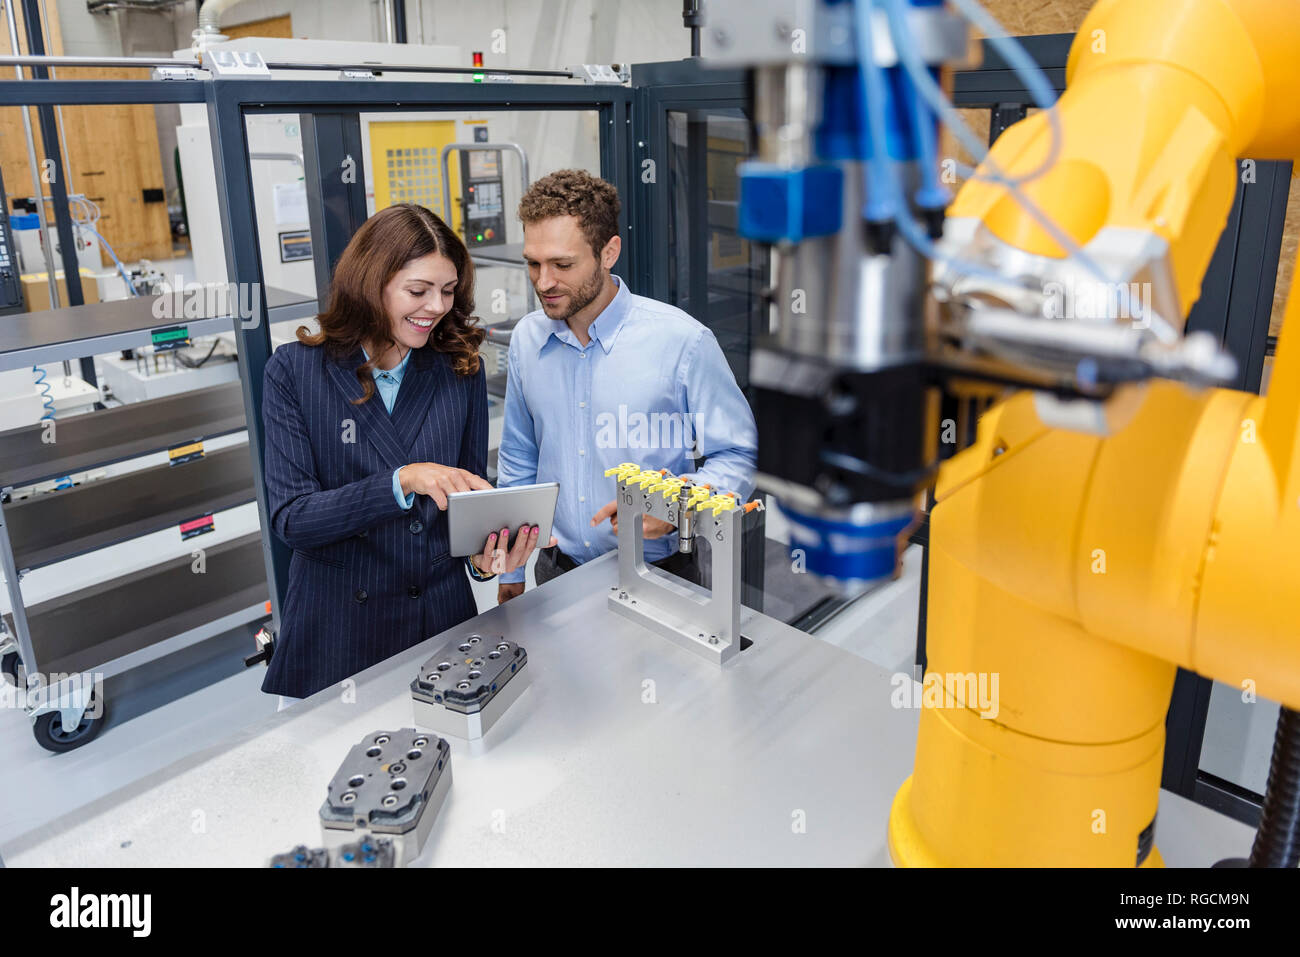 Colleagues in high tech company controlling industrial robots, using digital tablet Stock Photo